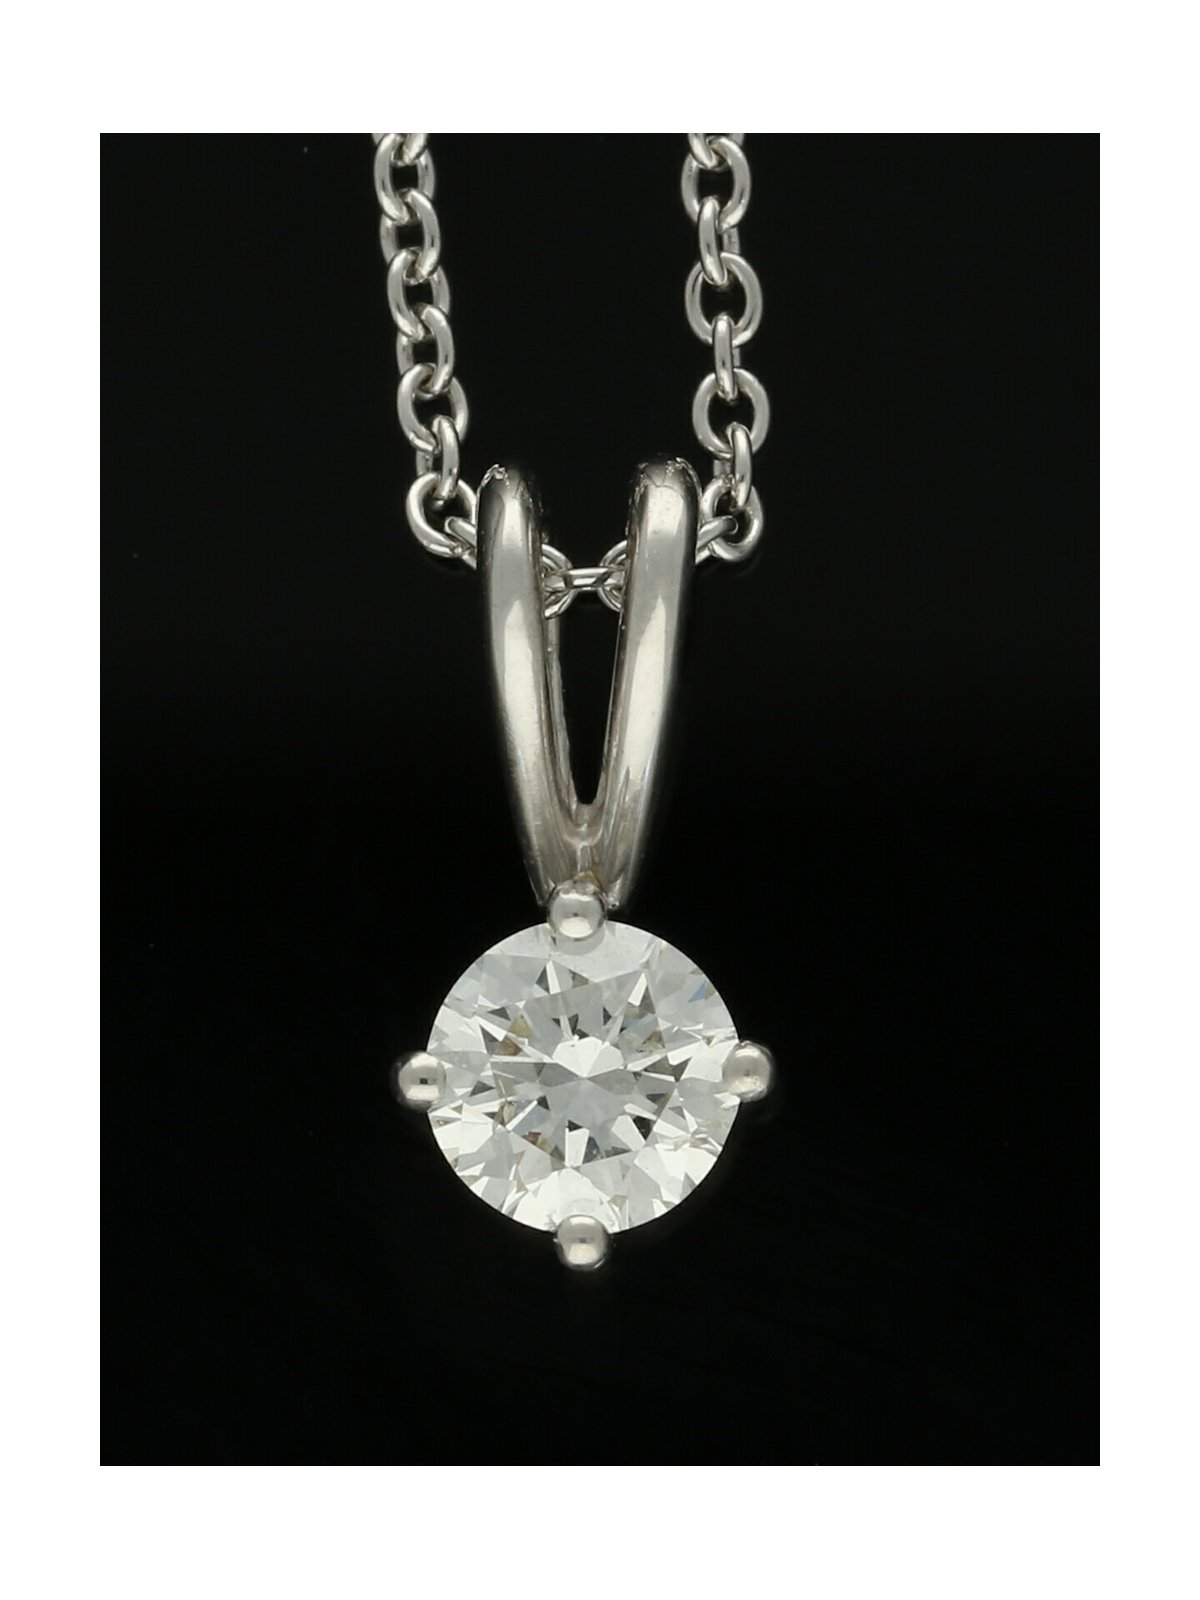 Diamond Solitaire Pendant "The Catherine Collection" 0.40ct Round Brilliant Cut in 18ct White Gold